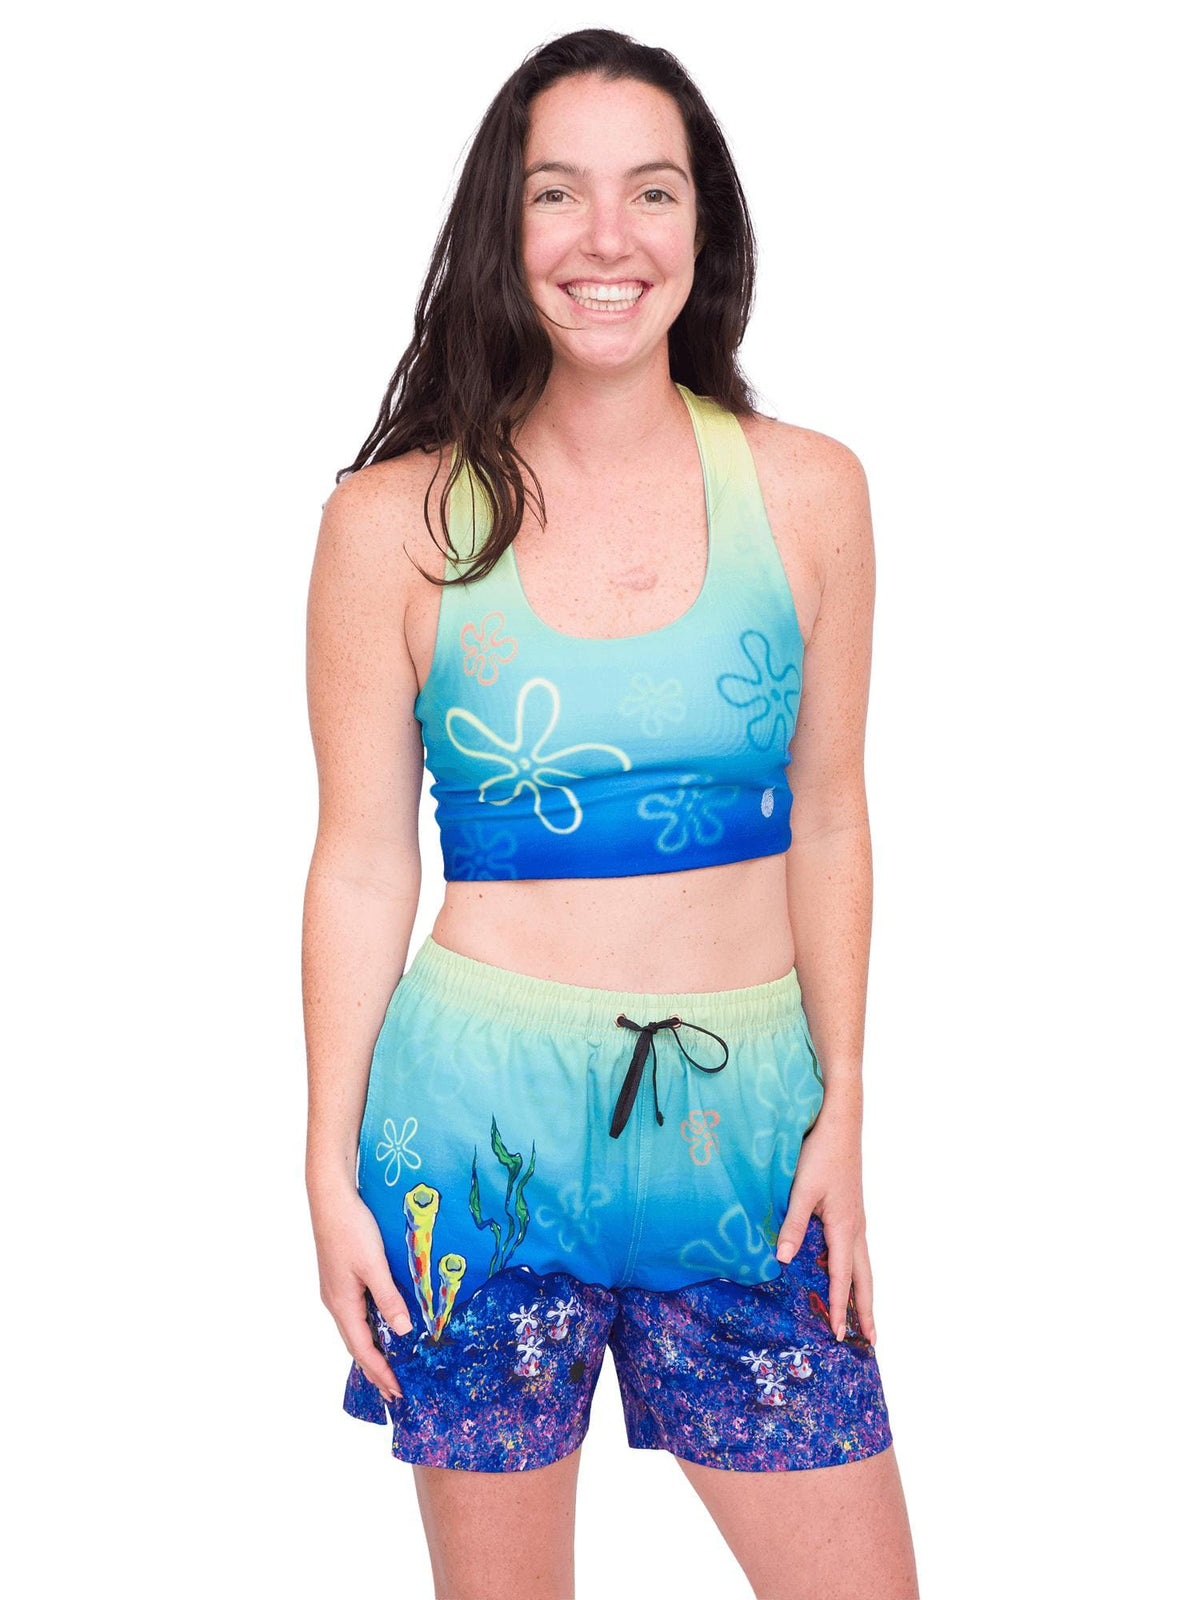 Model: Maddie is the Program &amp; Outreach Director at Debris Free Oceans and a restoration ecology educator. She is 5’8”, 135lbs, and wearing a size M top and S short.